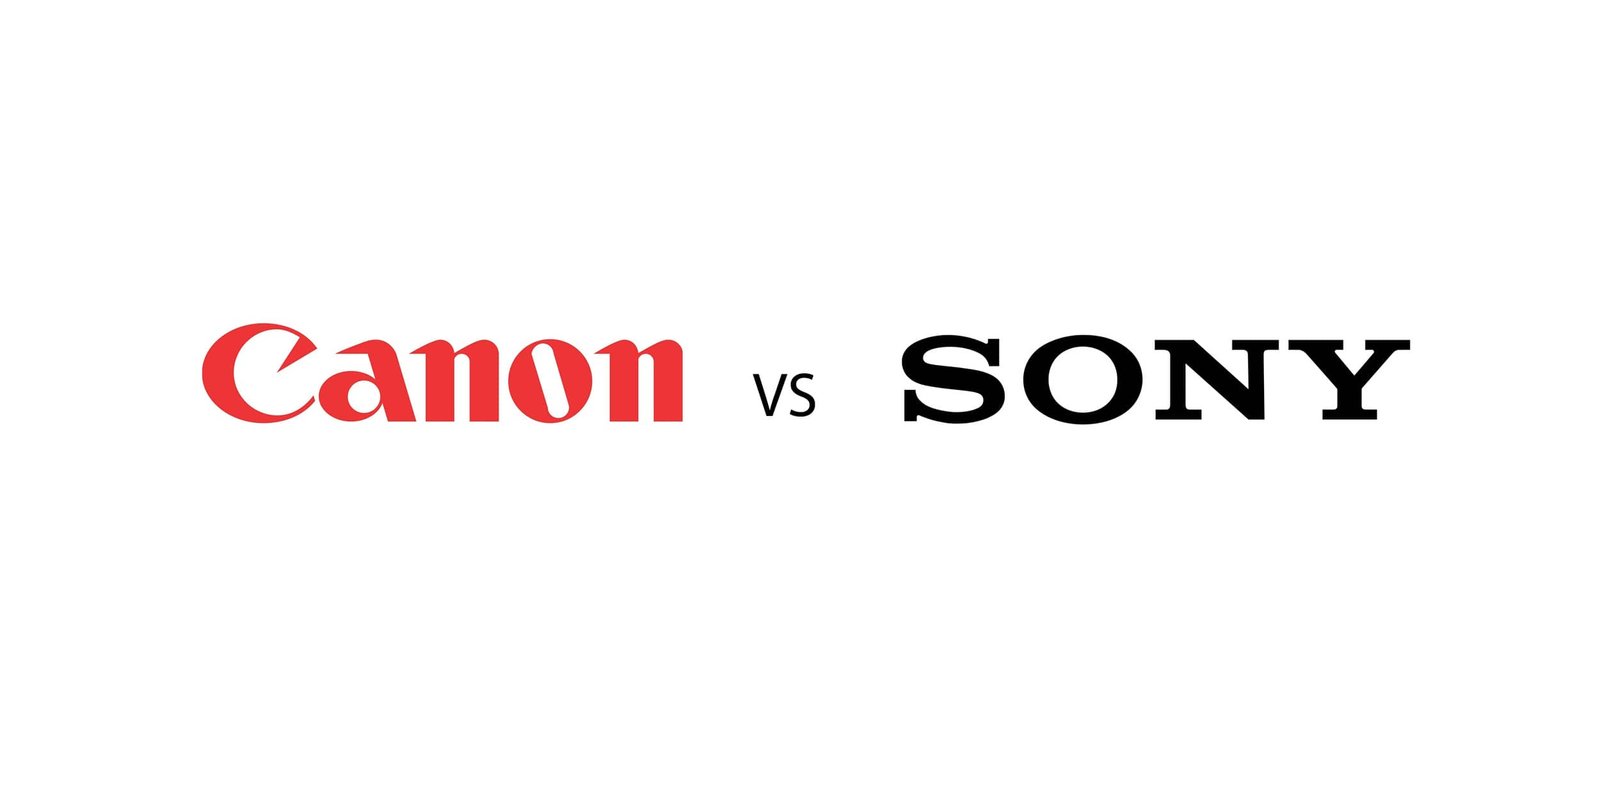 Canon EOS R5 vs. Sony A7R IV: Full-Frame Mirrorless Cameras Compared